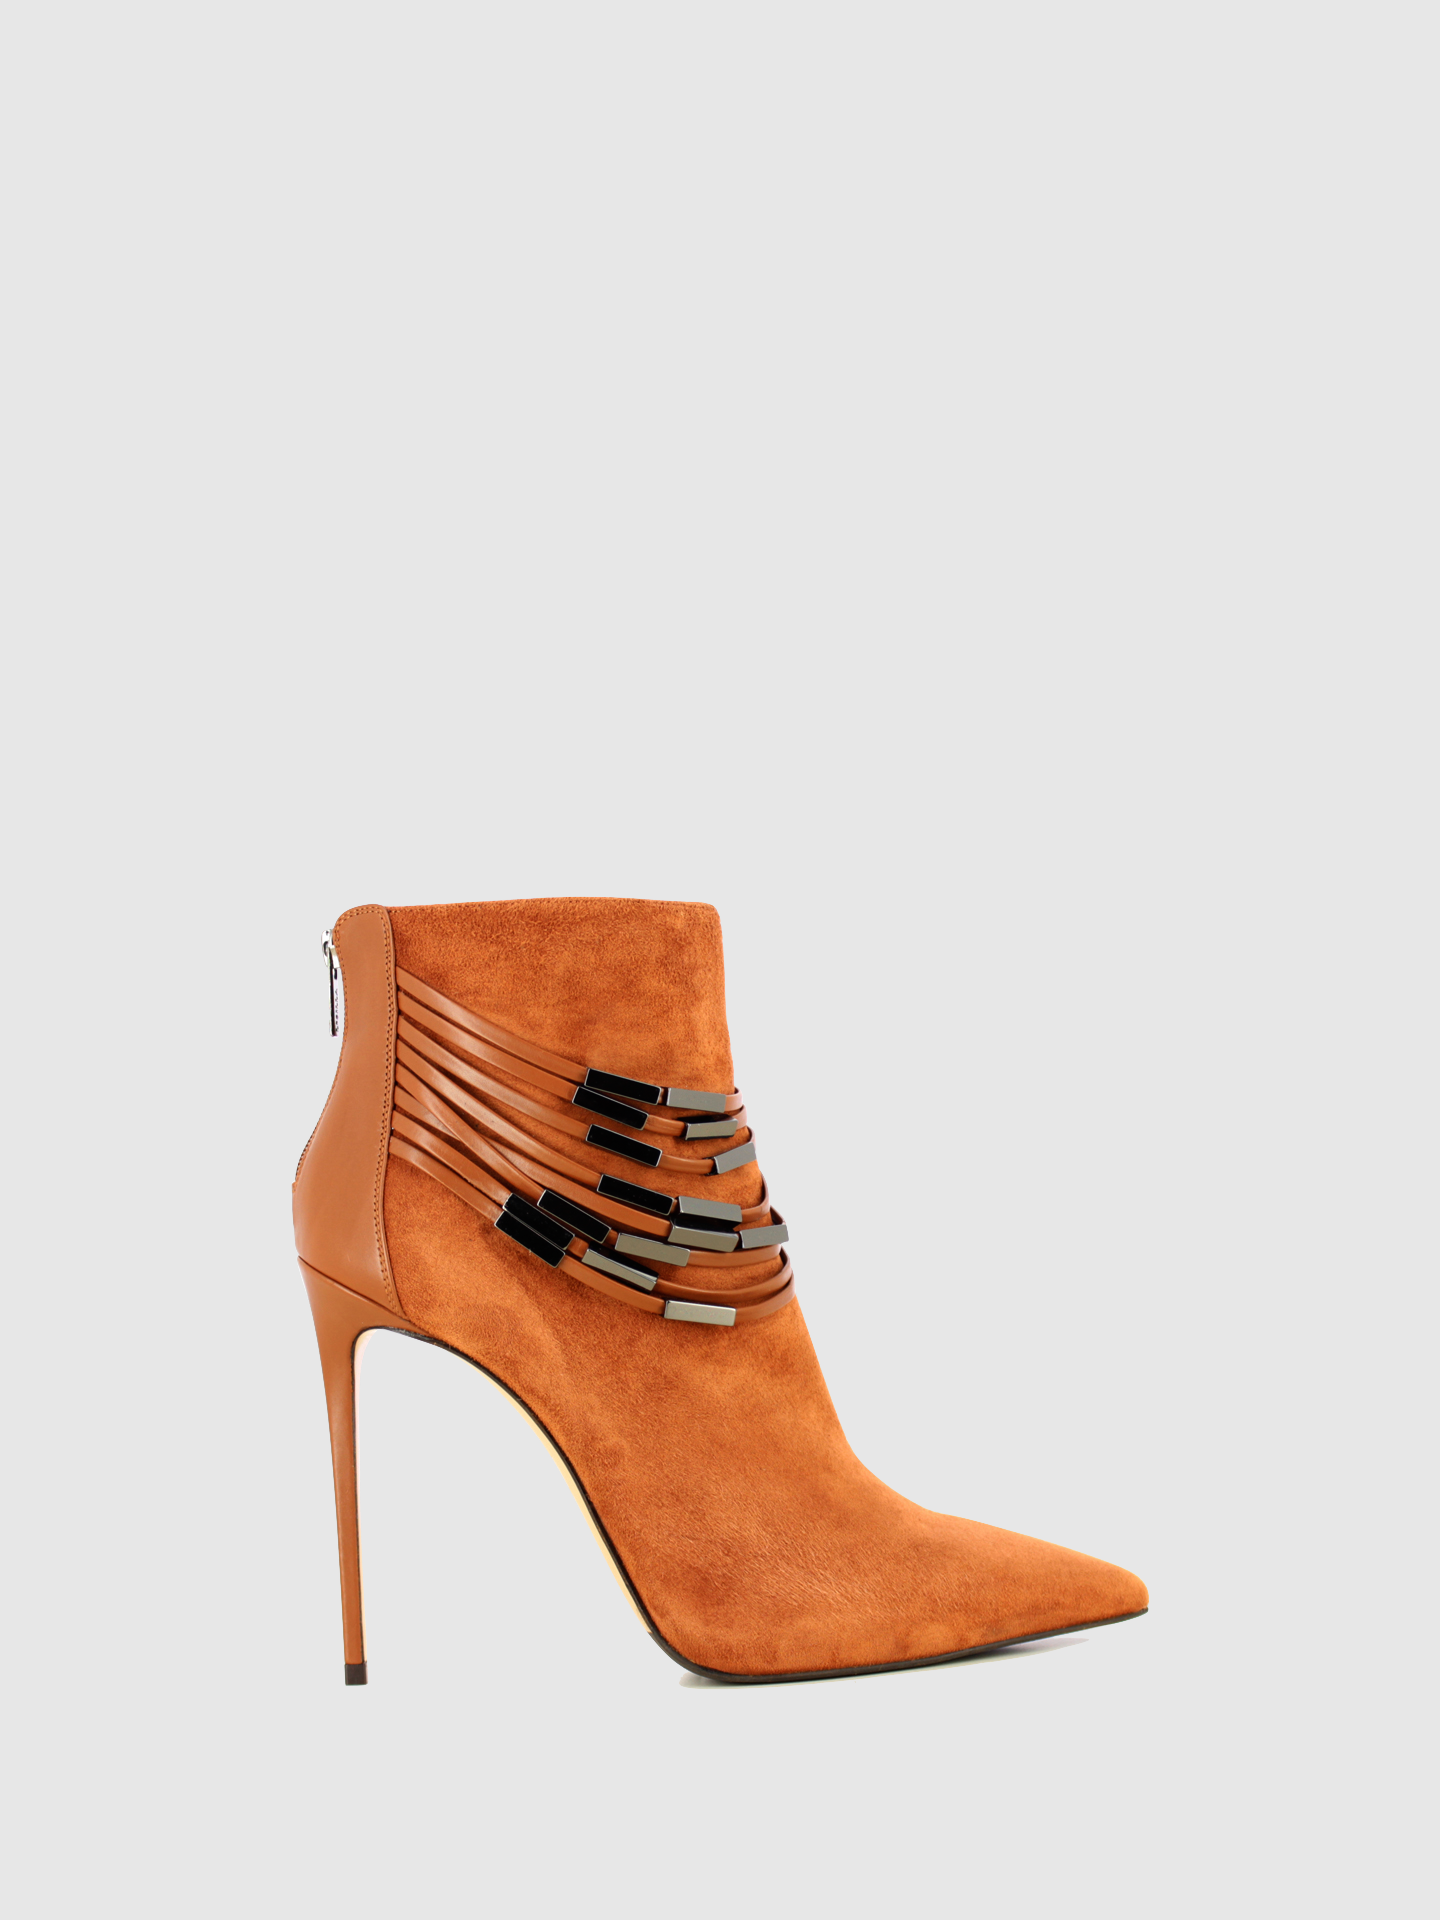 Le Silla Camel Zip Up Ankle Boots